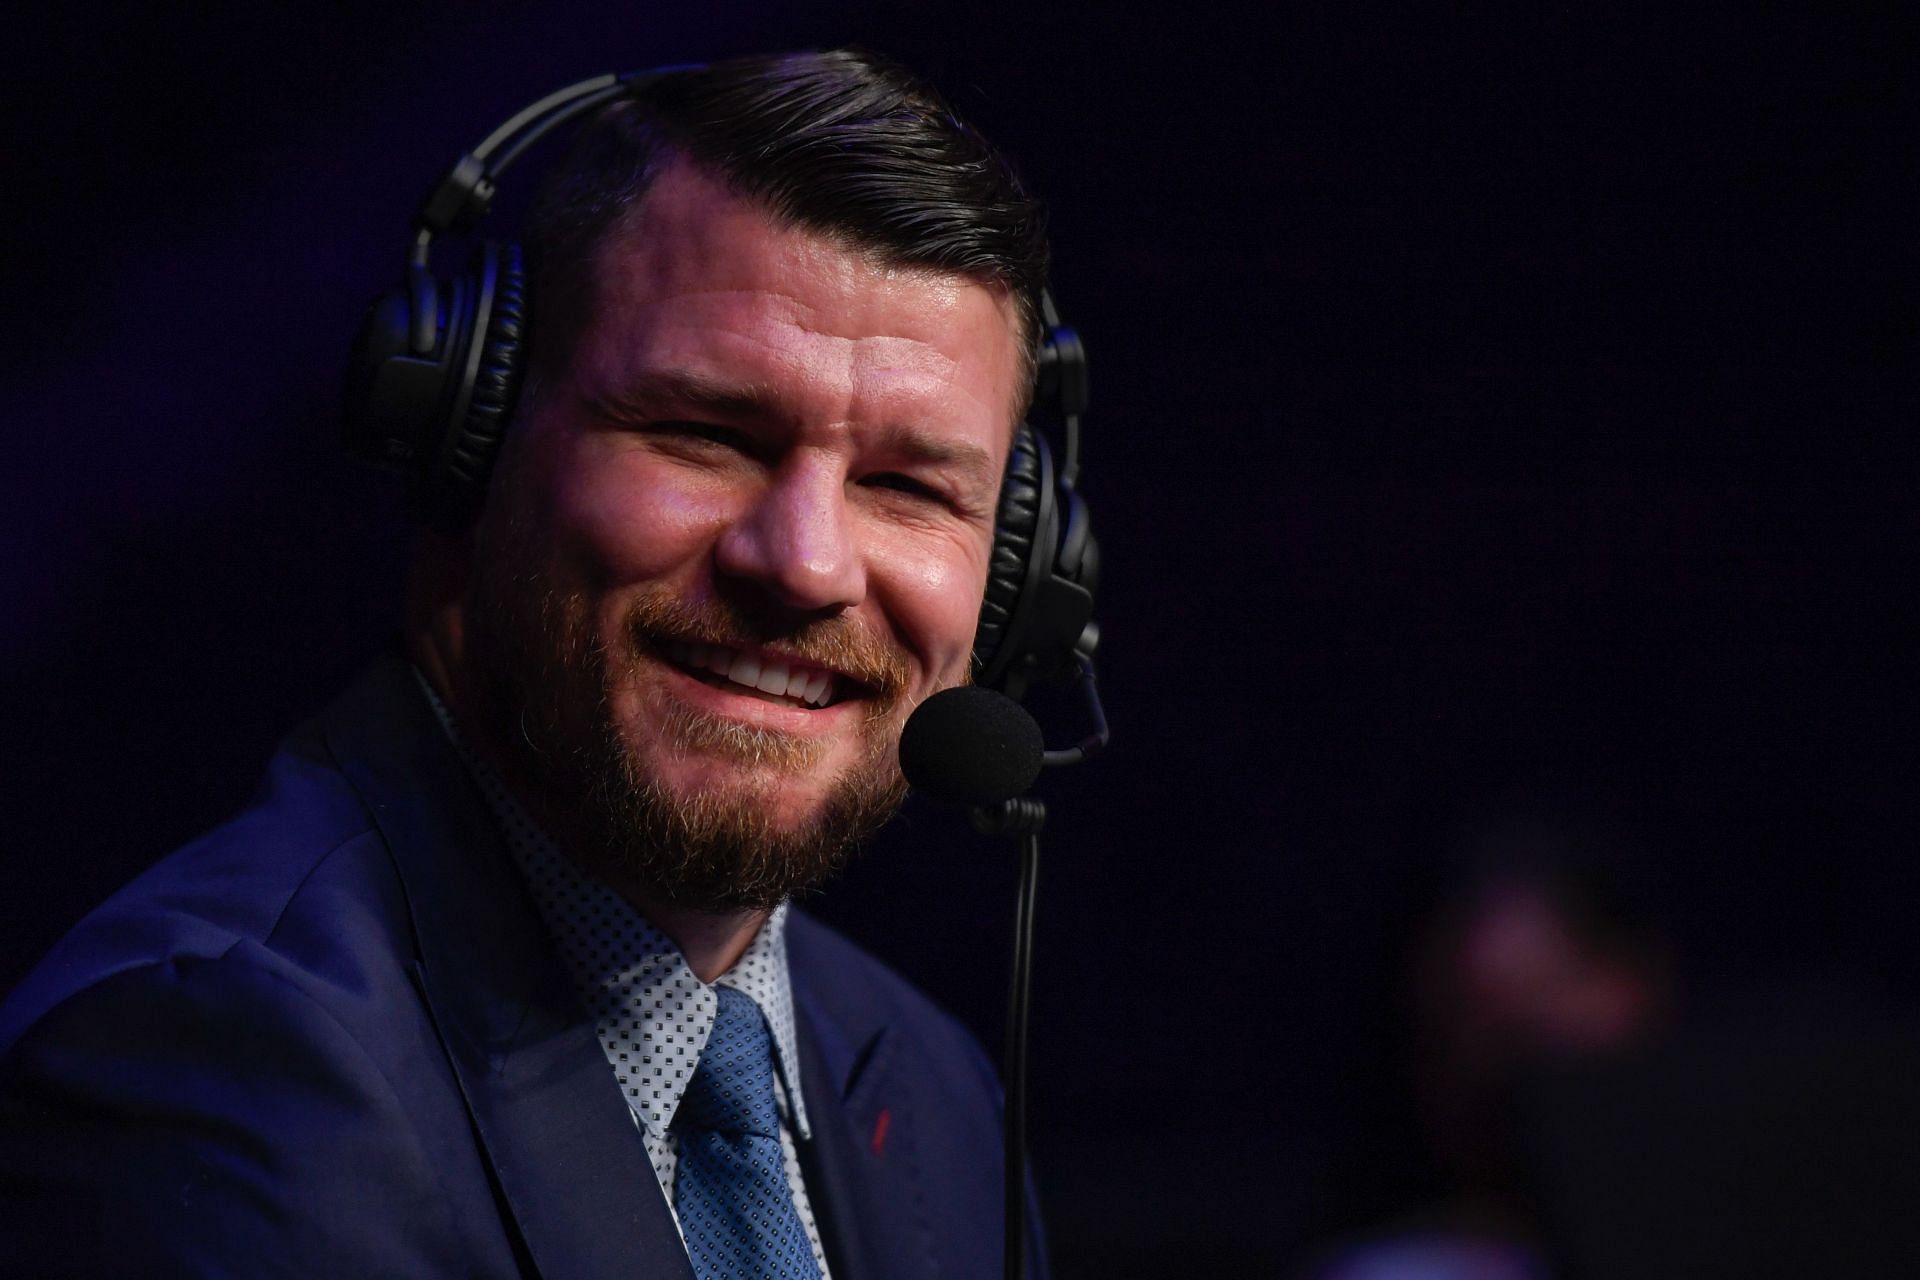 Michael Bisping has found success post-UFC career